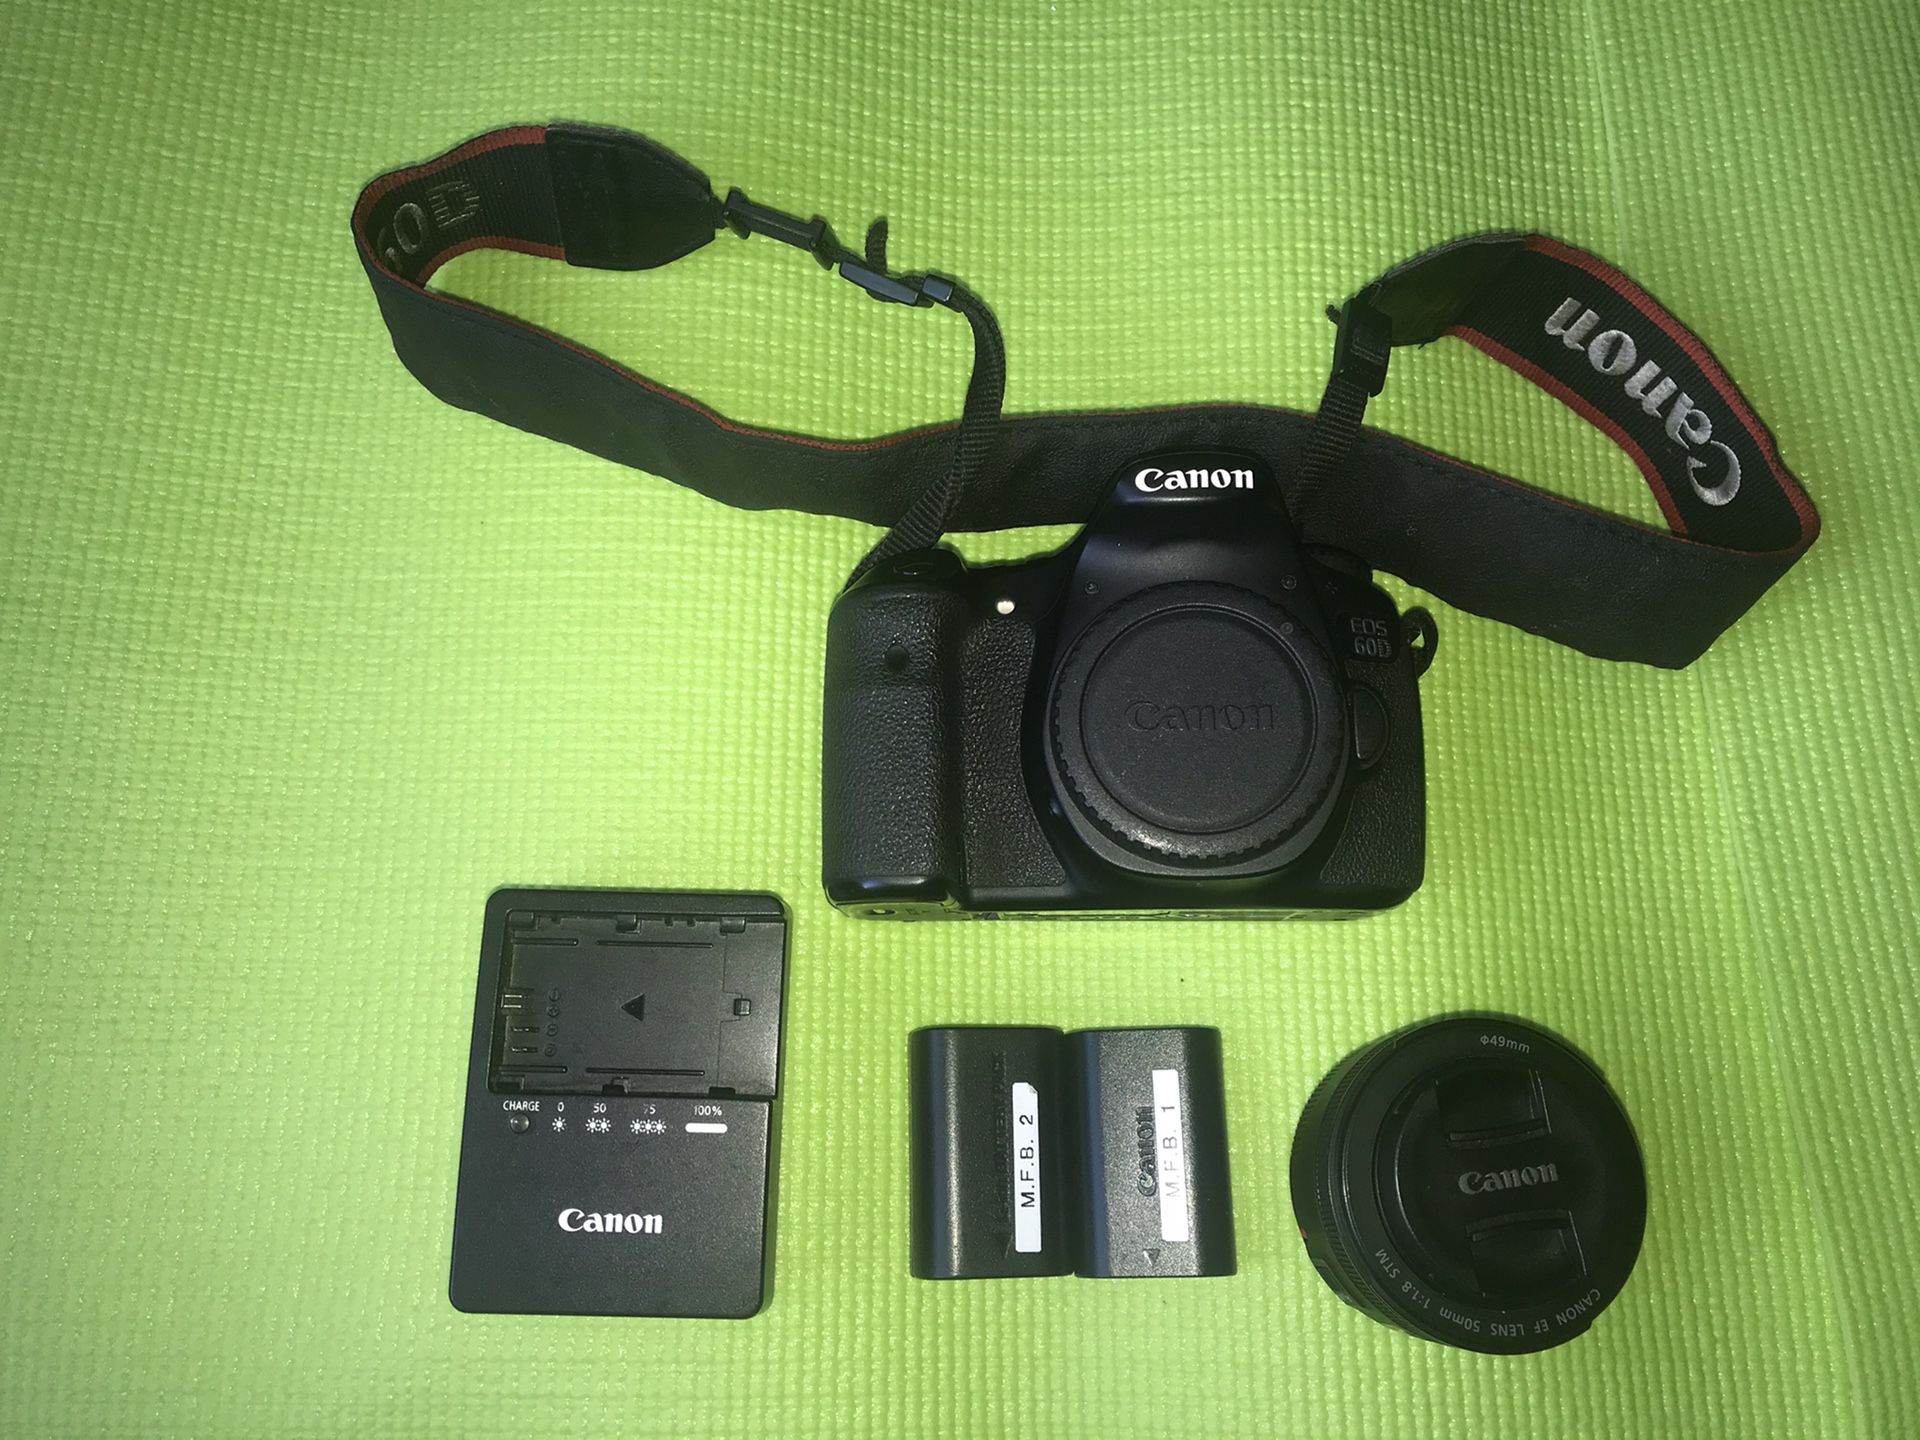 CANON 60D DSLR CAMERA WITH LENS, CHARGER AND BATTERIES